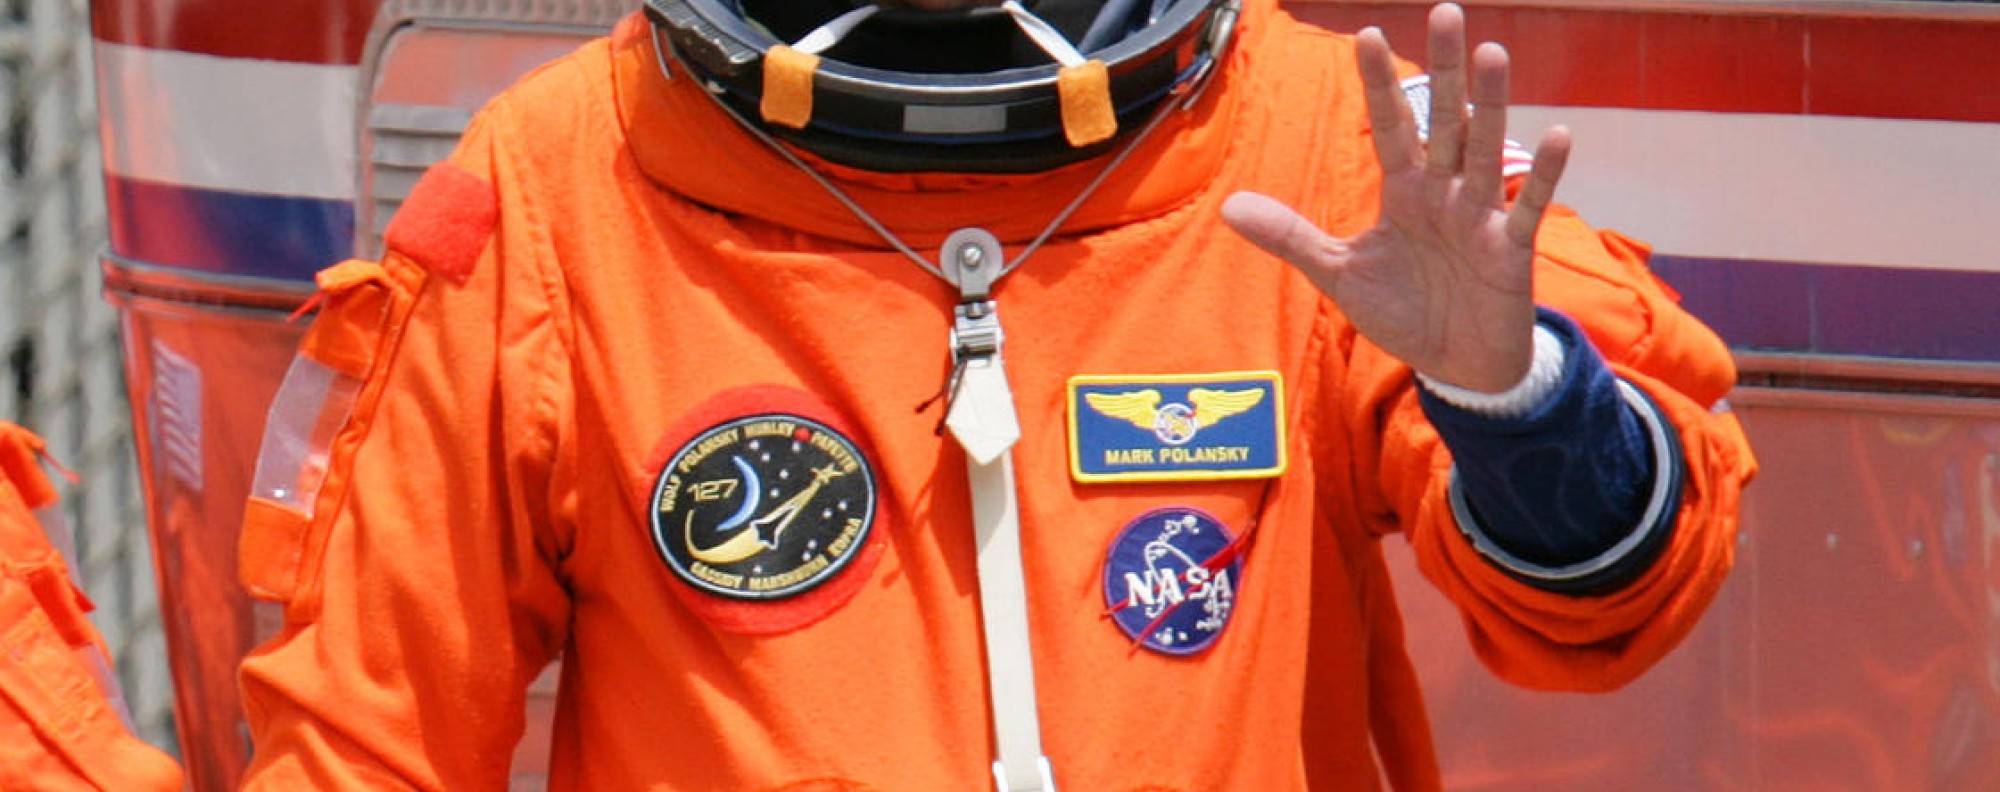 The astronaut spacesuit jerseys are out of this world